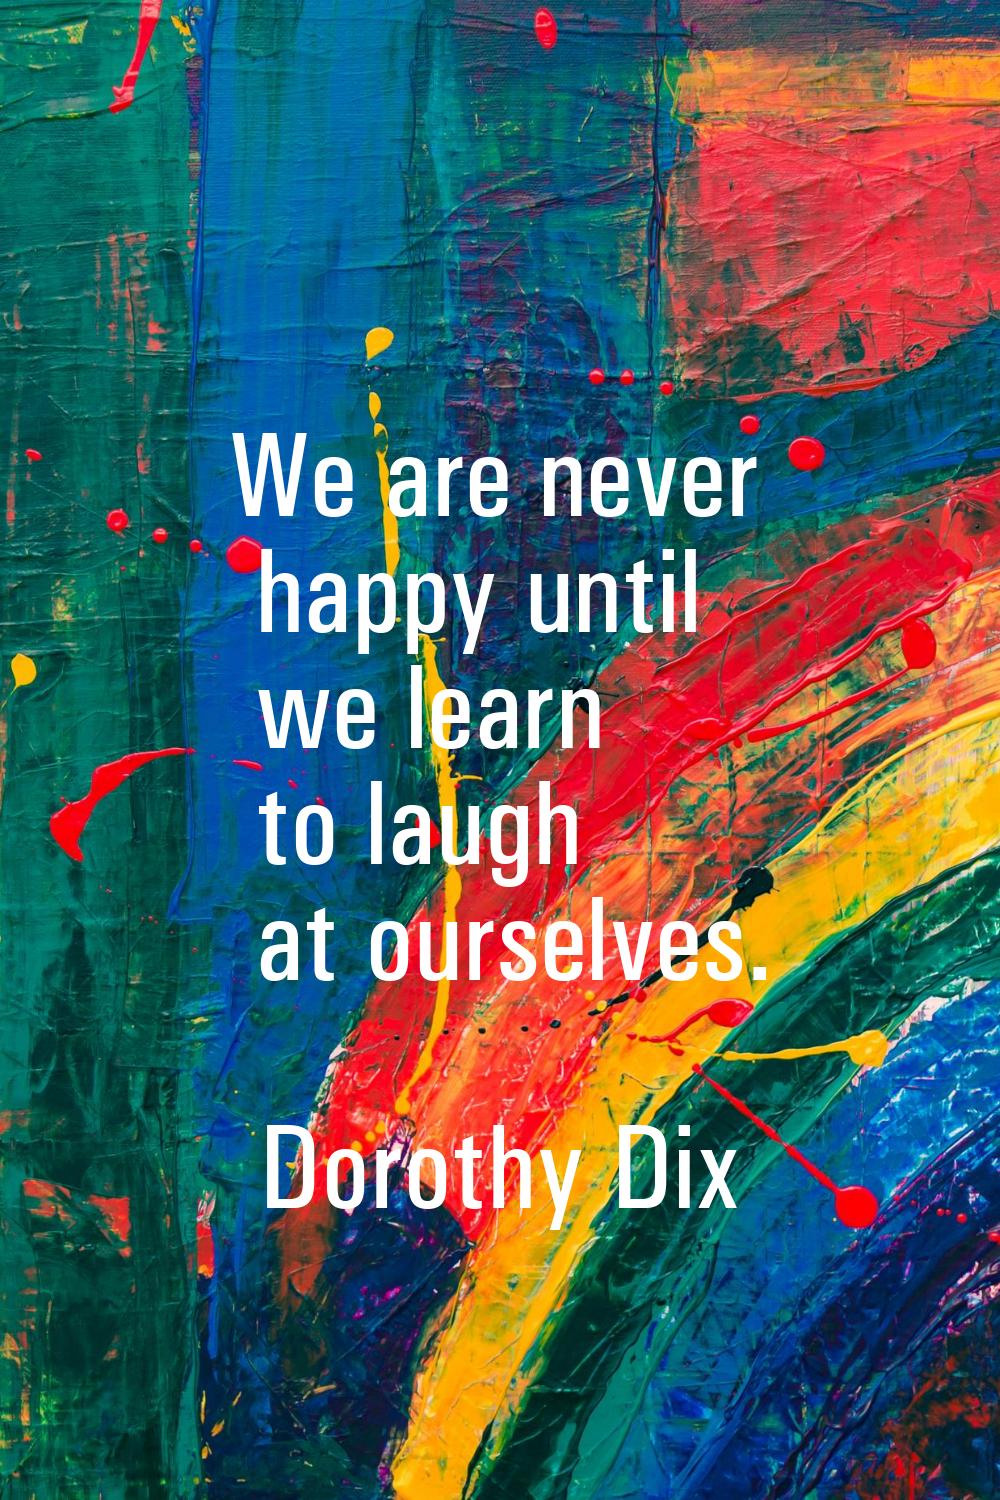 We are never happy until we learn to laugh at ourselves.